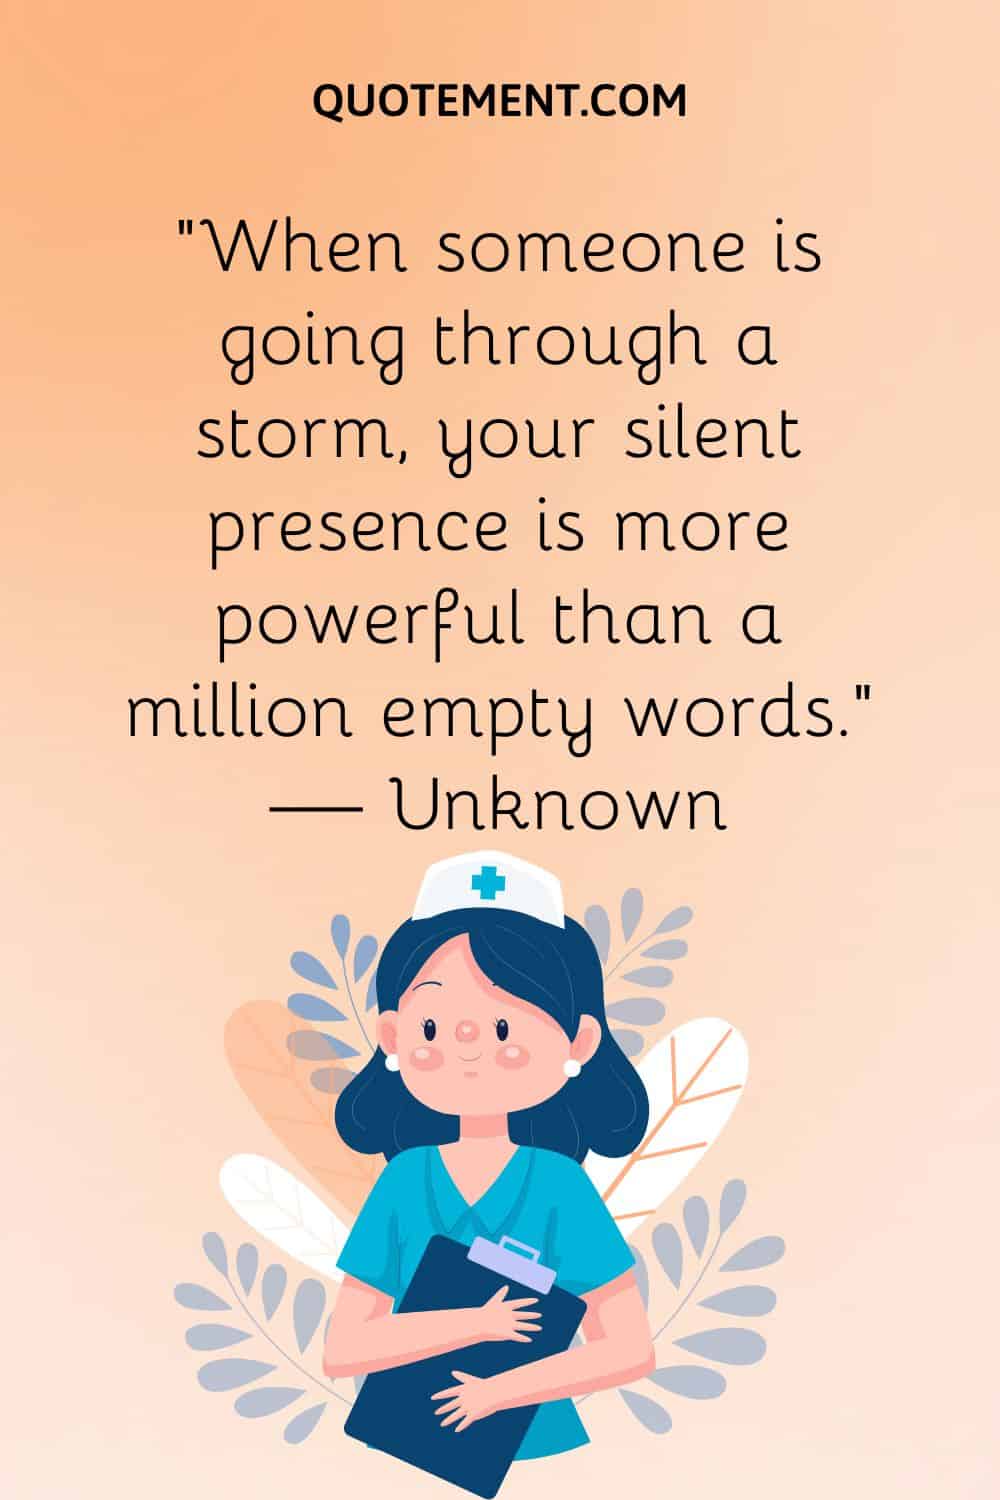 “When someone is going through a storm, your silent presence is more powerful than a million empty words.” — Unknown